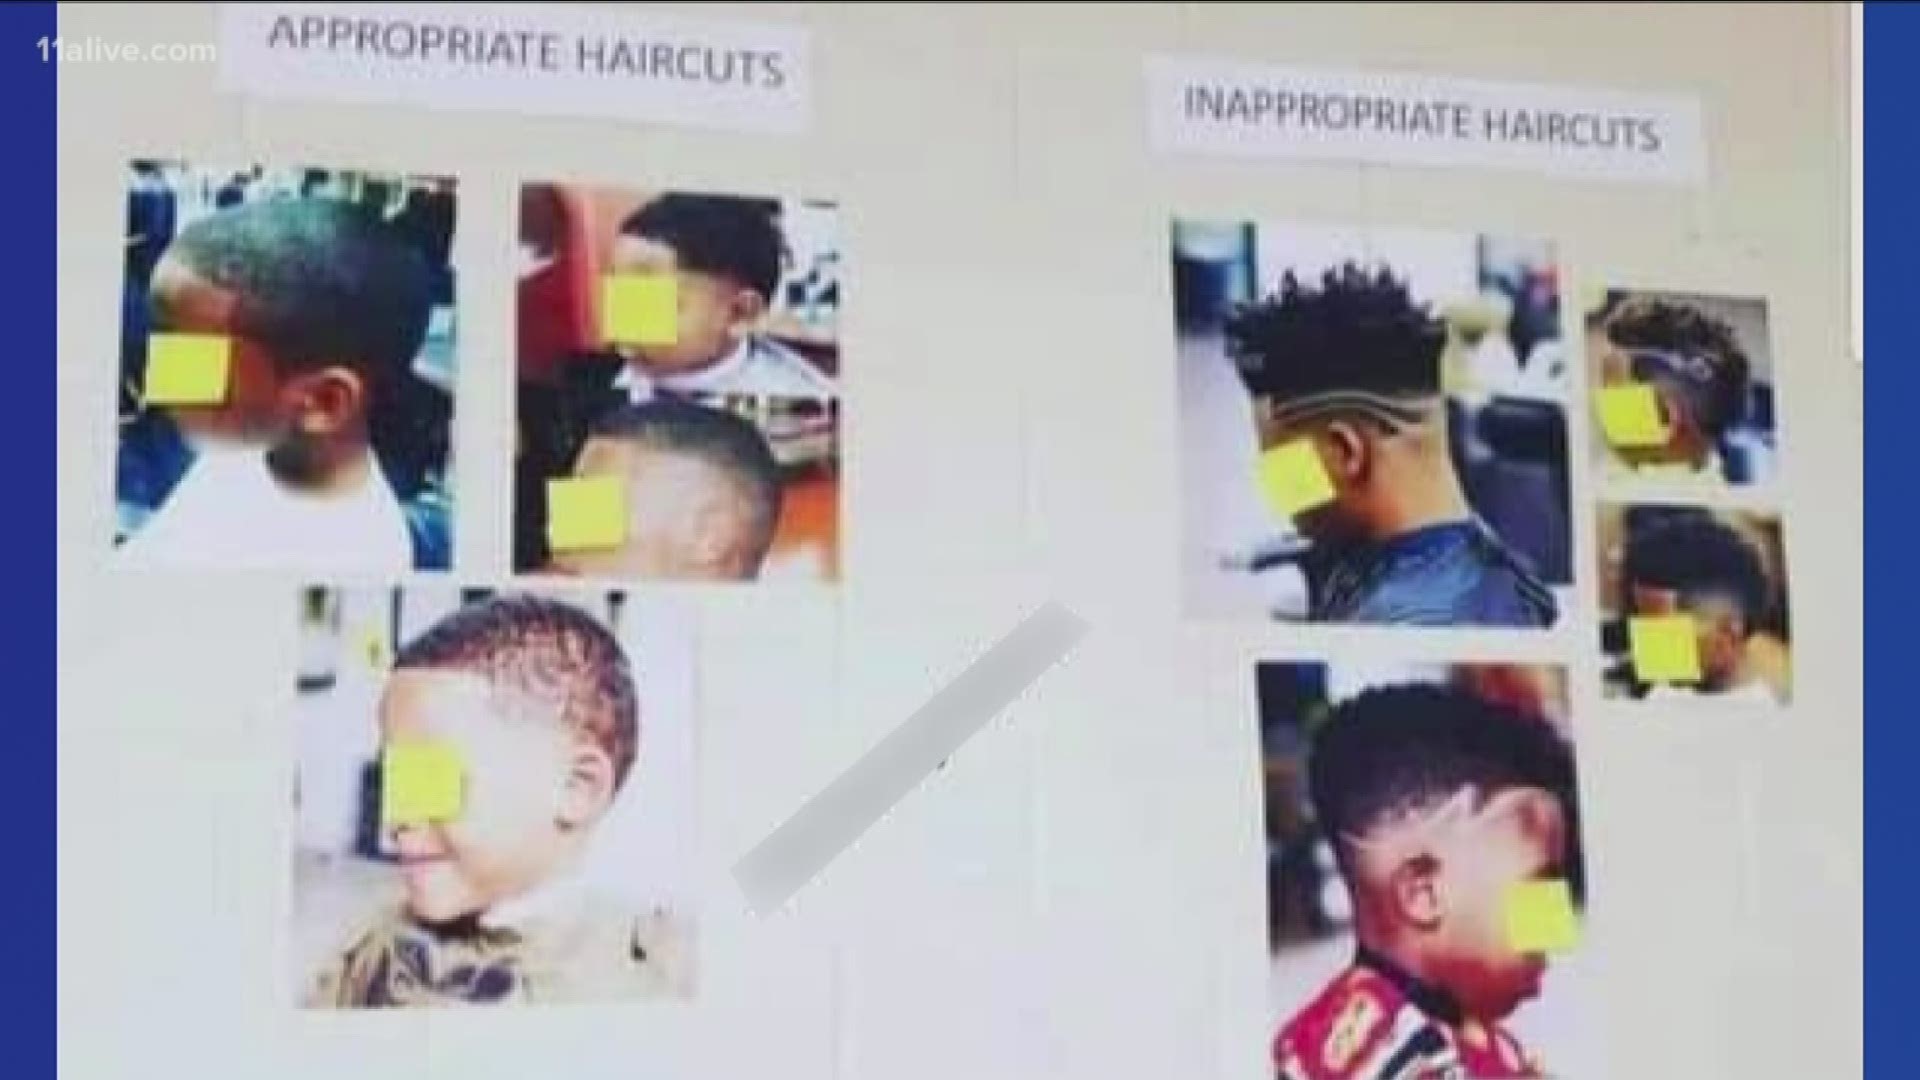 Black student disciplined over hairstyle hopes to 'start being a kid again'  | Chattanooga Times Free Press